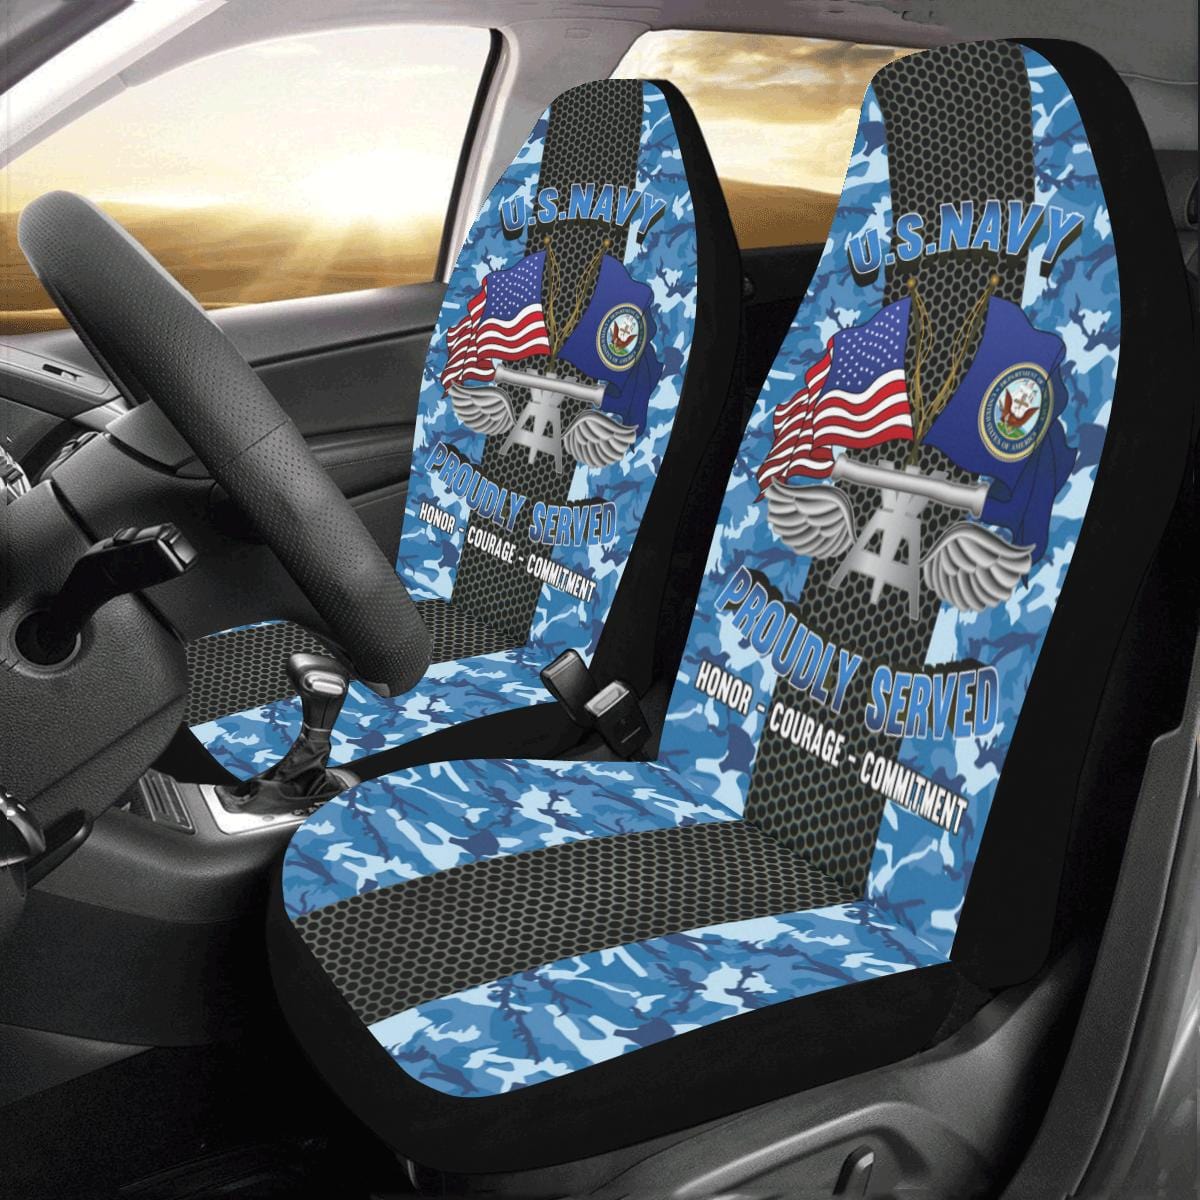 Navy Aviation Fire Control Tech Navy AQ Car Seat Covers (Set of 2)-SeatCovers-Navy-Rate-Veterans Nation